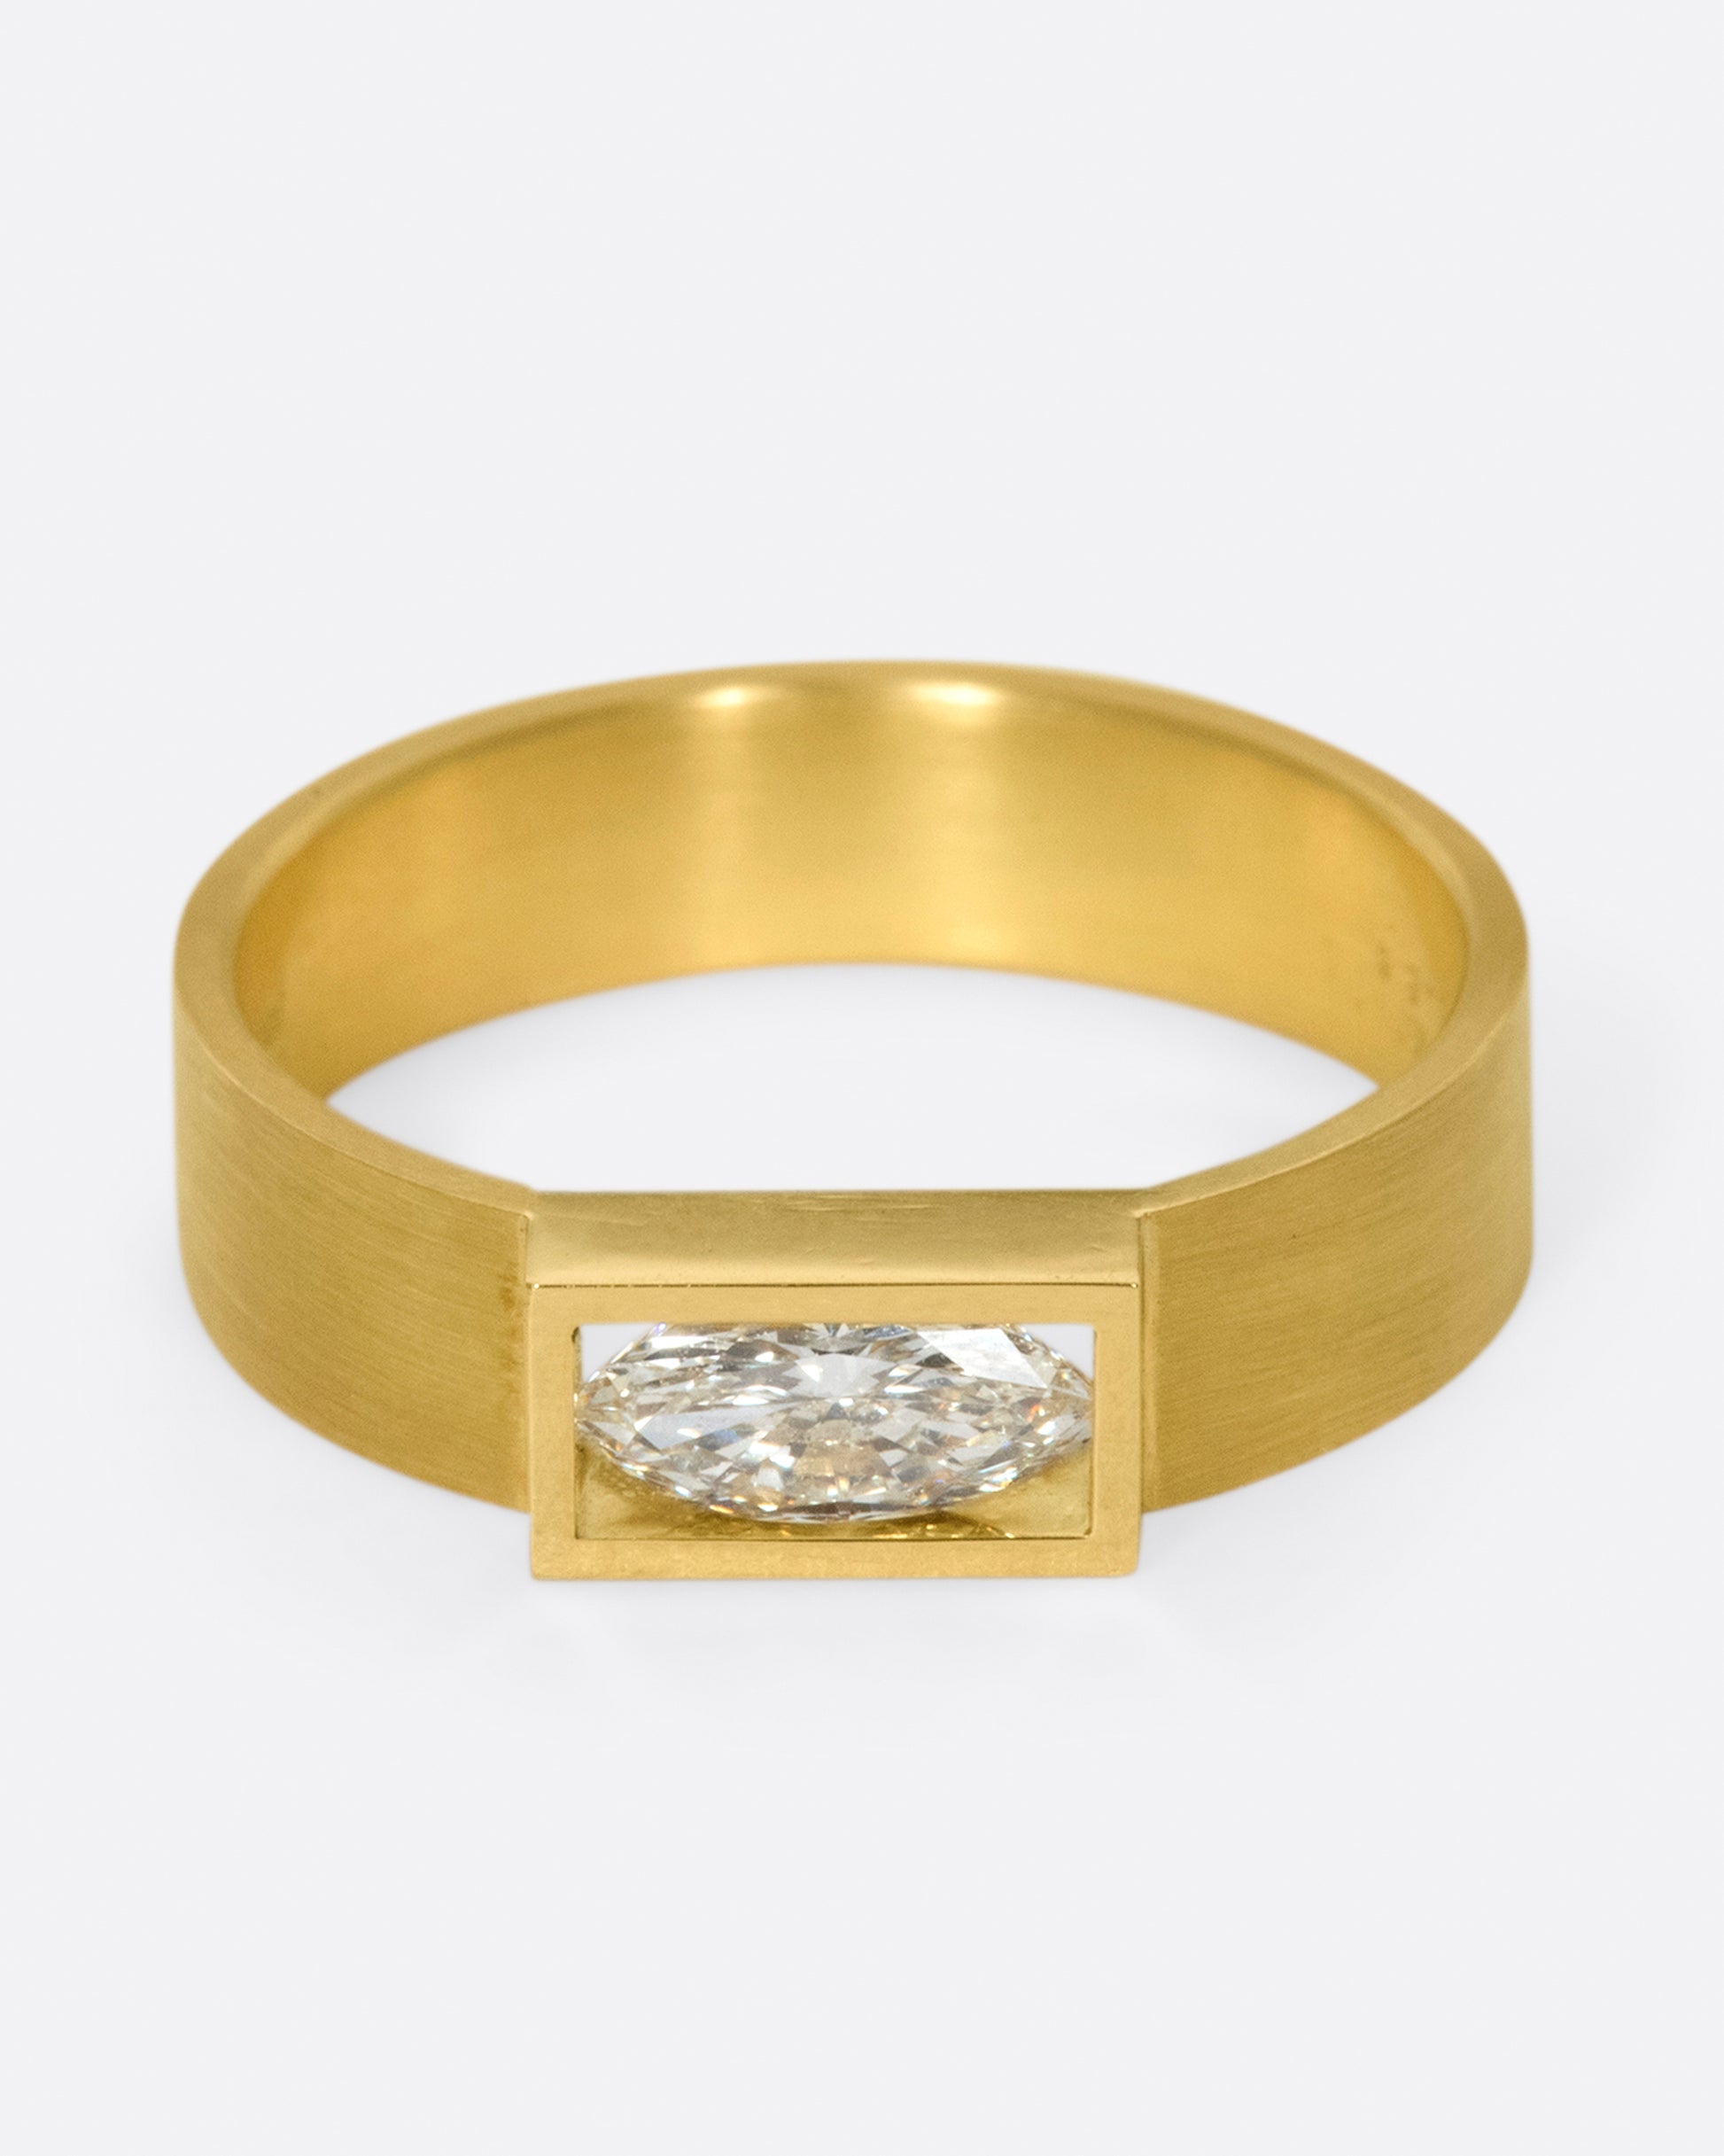 A matte band with marquise diamond set east-west at its center.